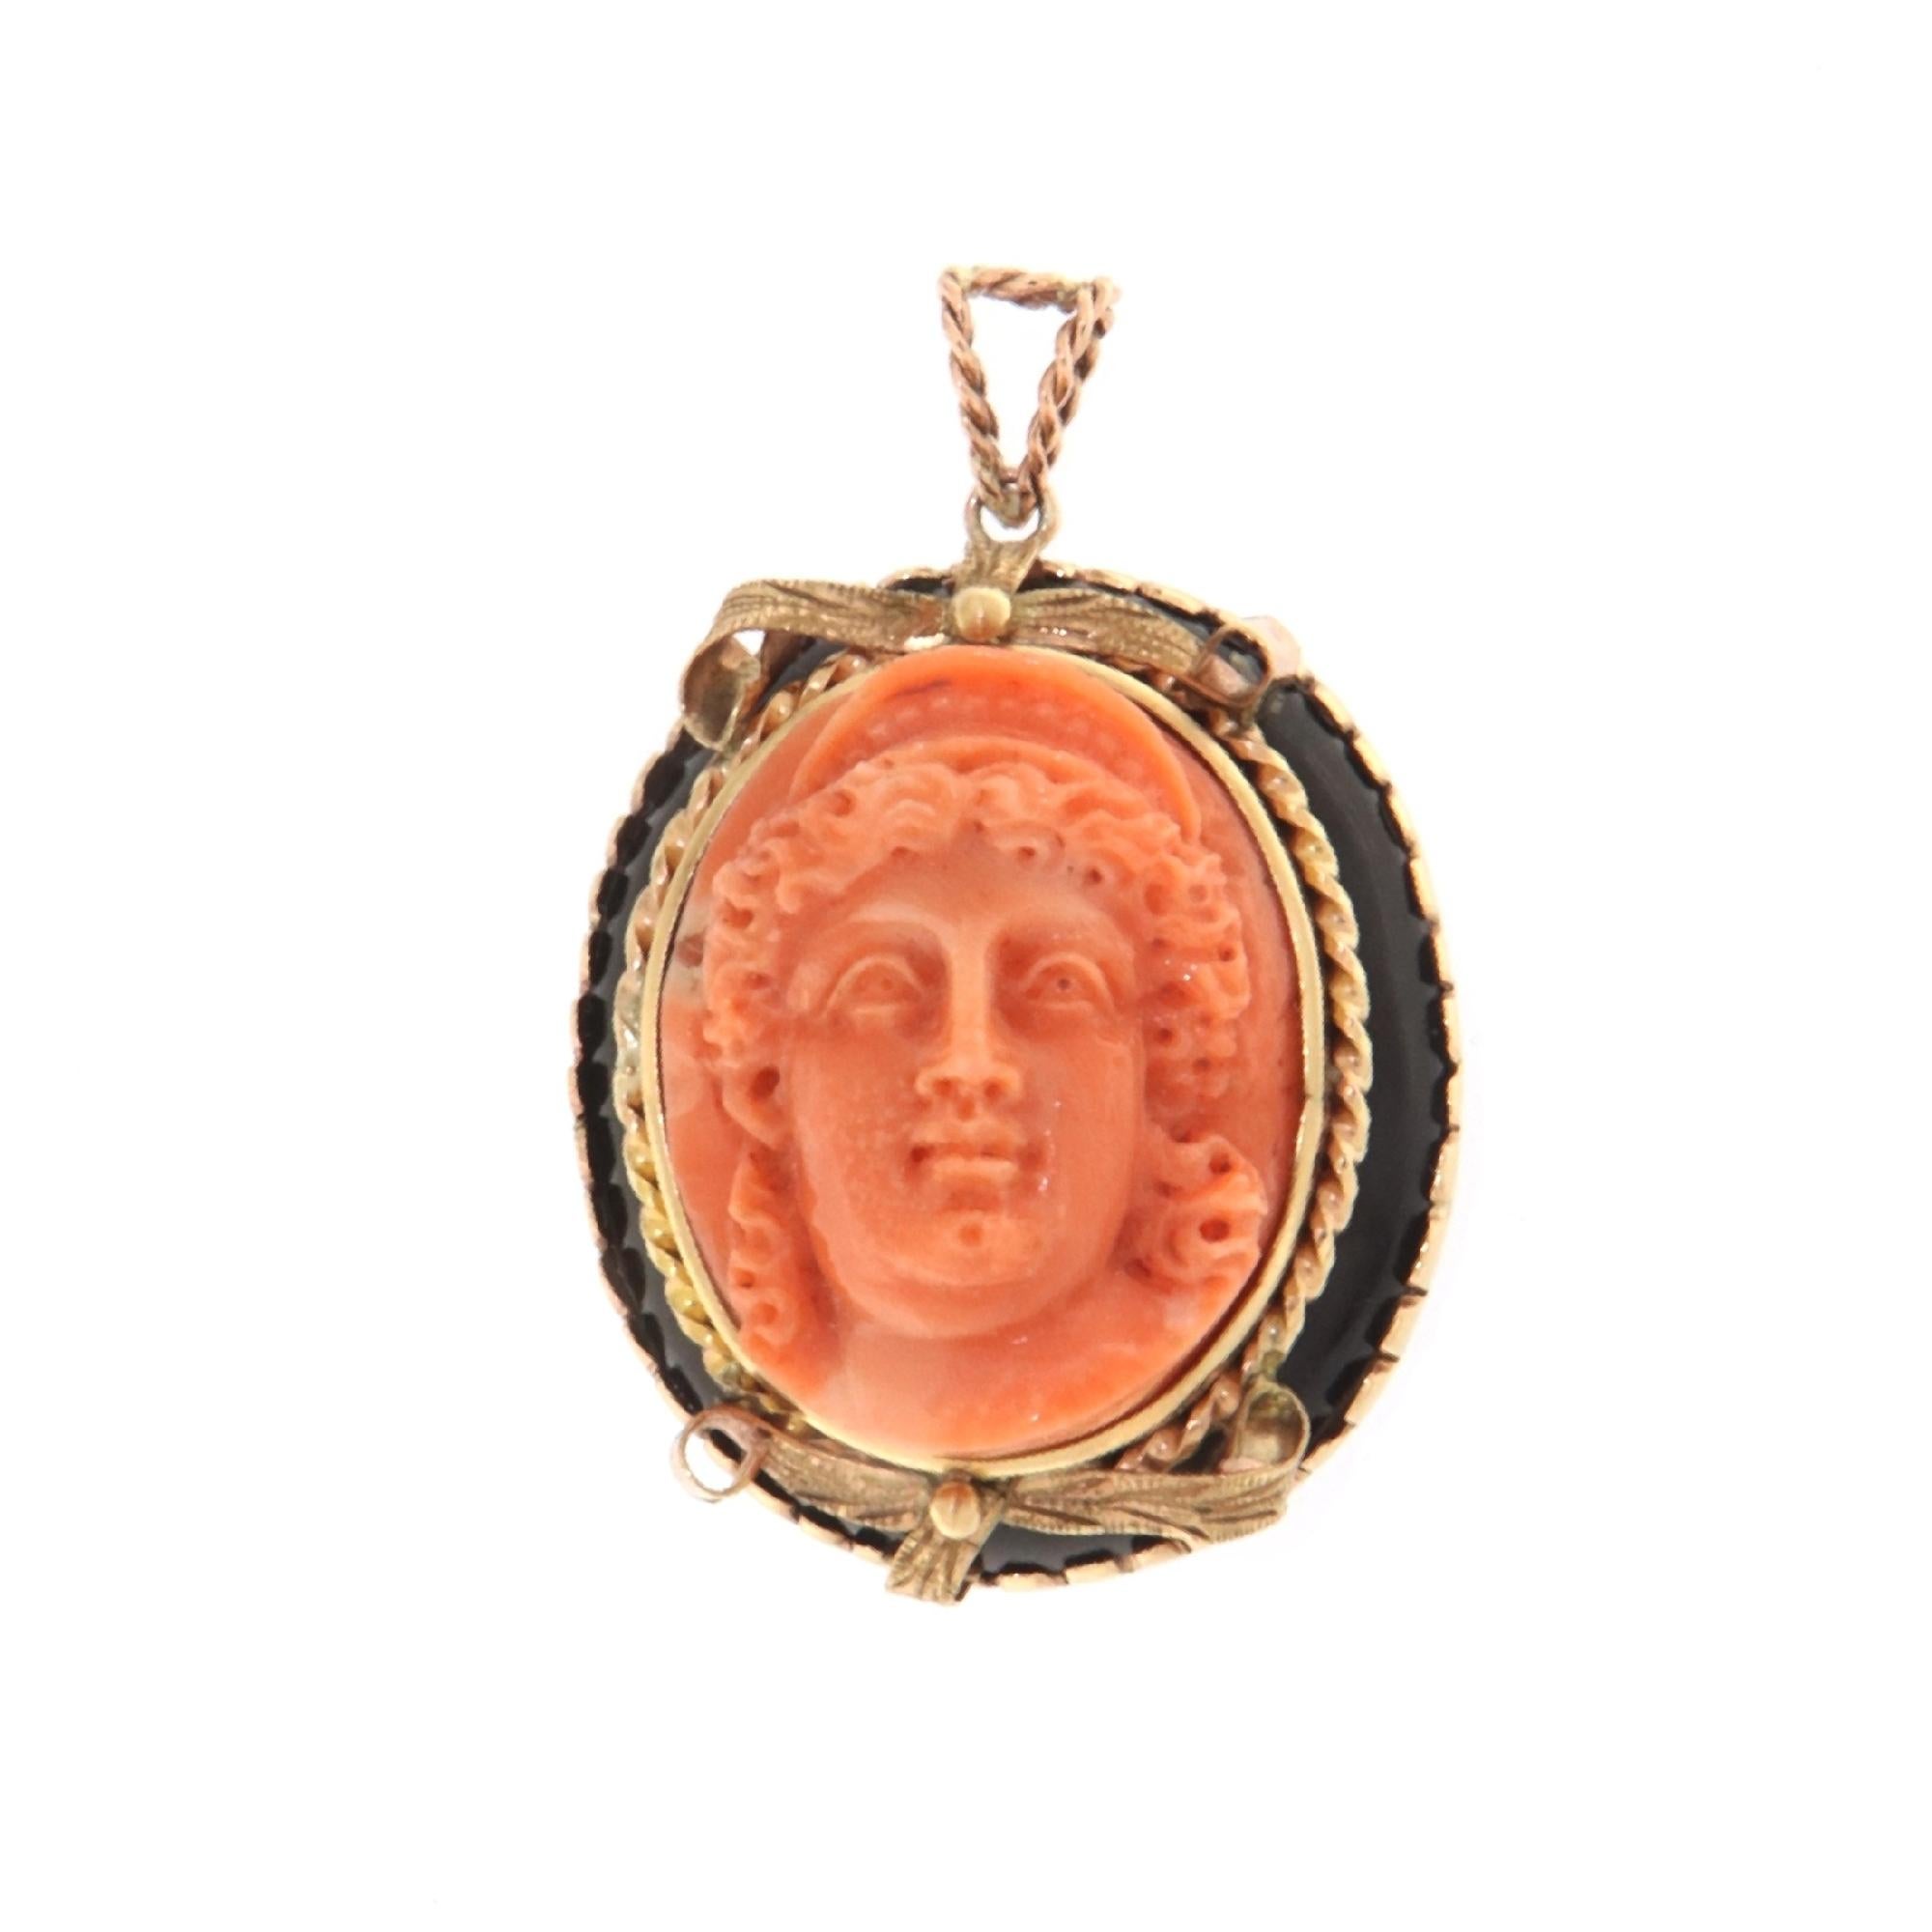 This sophisticated pendant, crafted in 9-karat gold, is a sublime fusion of classic elegance and contemporary design. At the heart of this jewel lies a coral cameo, finely carved to reveal the craftsmanship and artistic depth of its creation. The